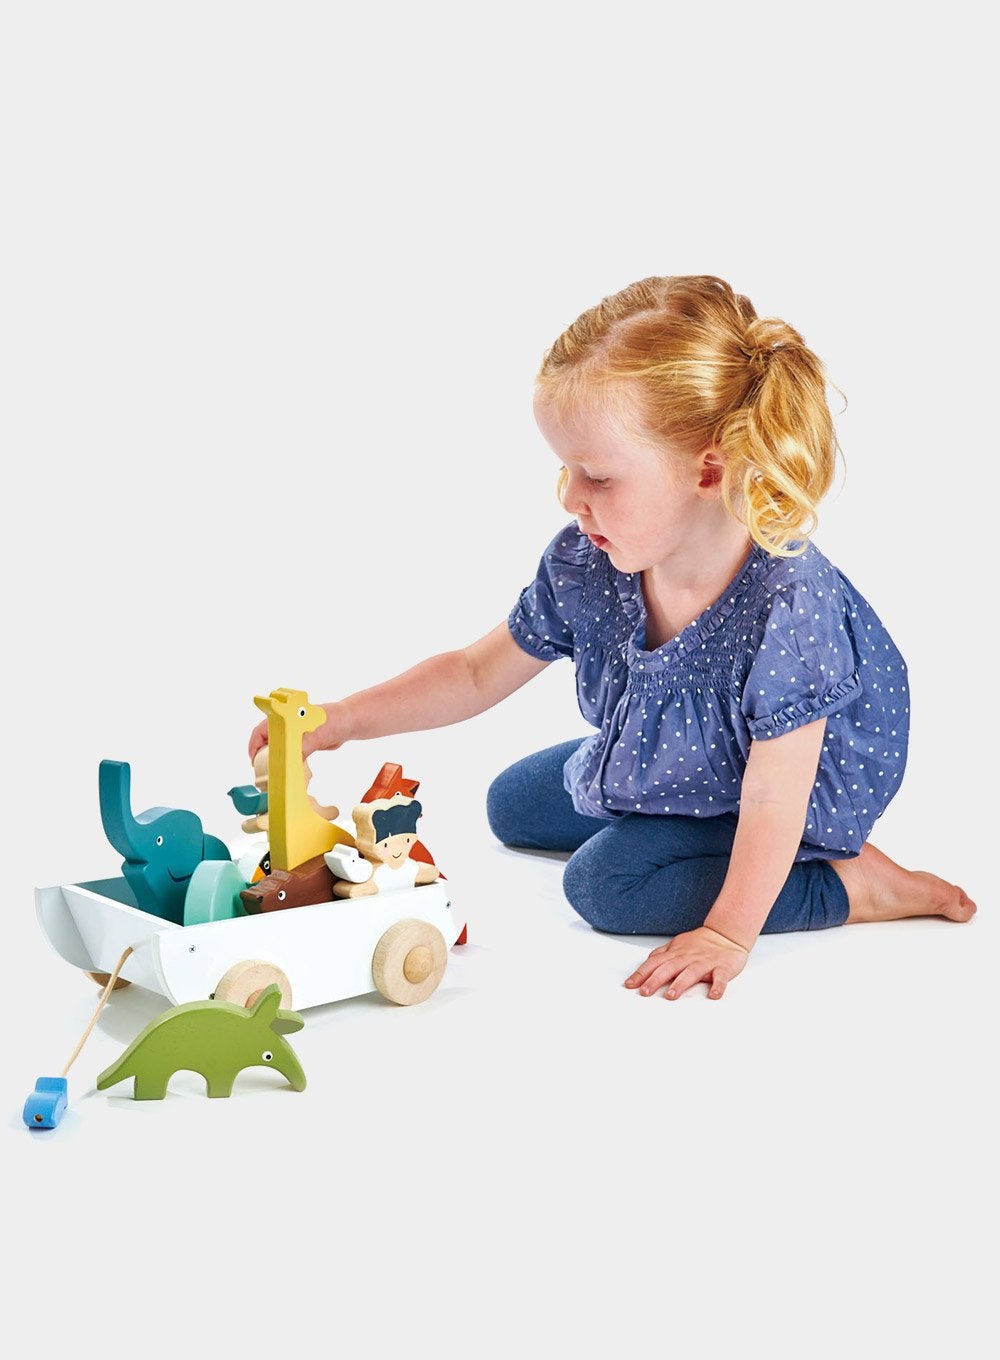 Tender Leaf Toys Toy The Friend Ship - Trotters Childrenswear